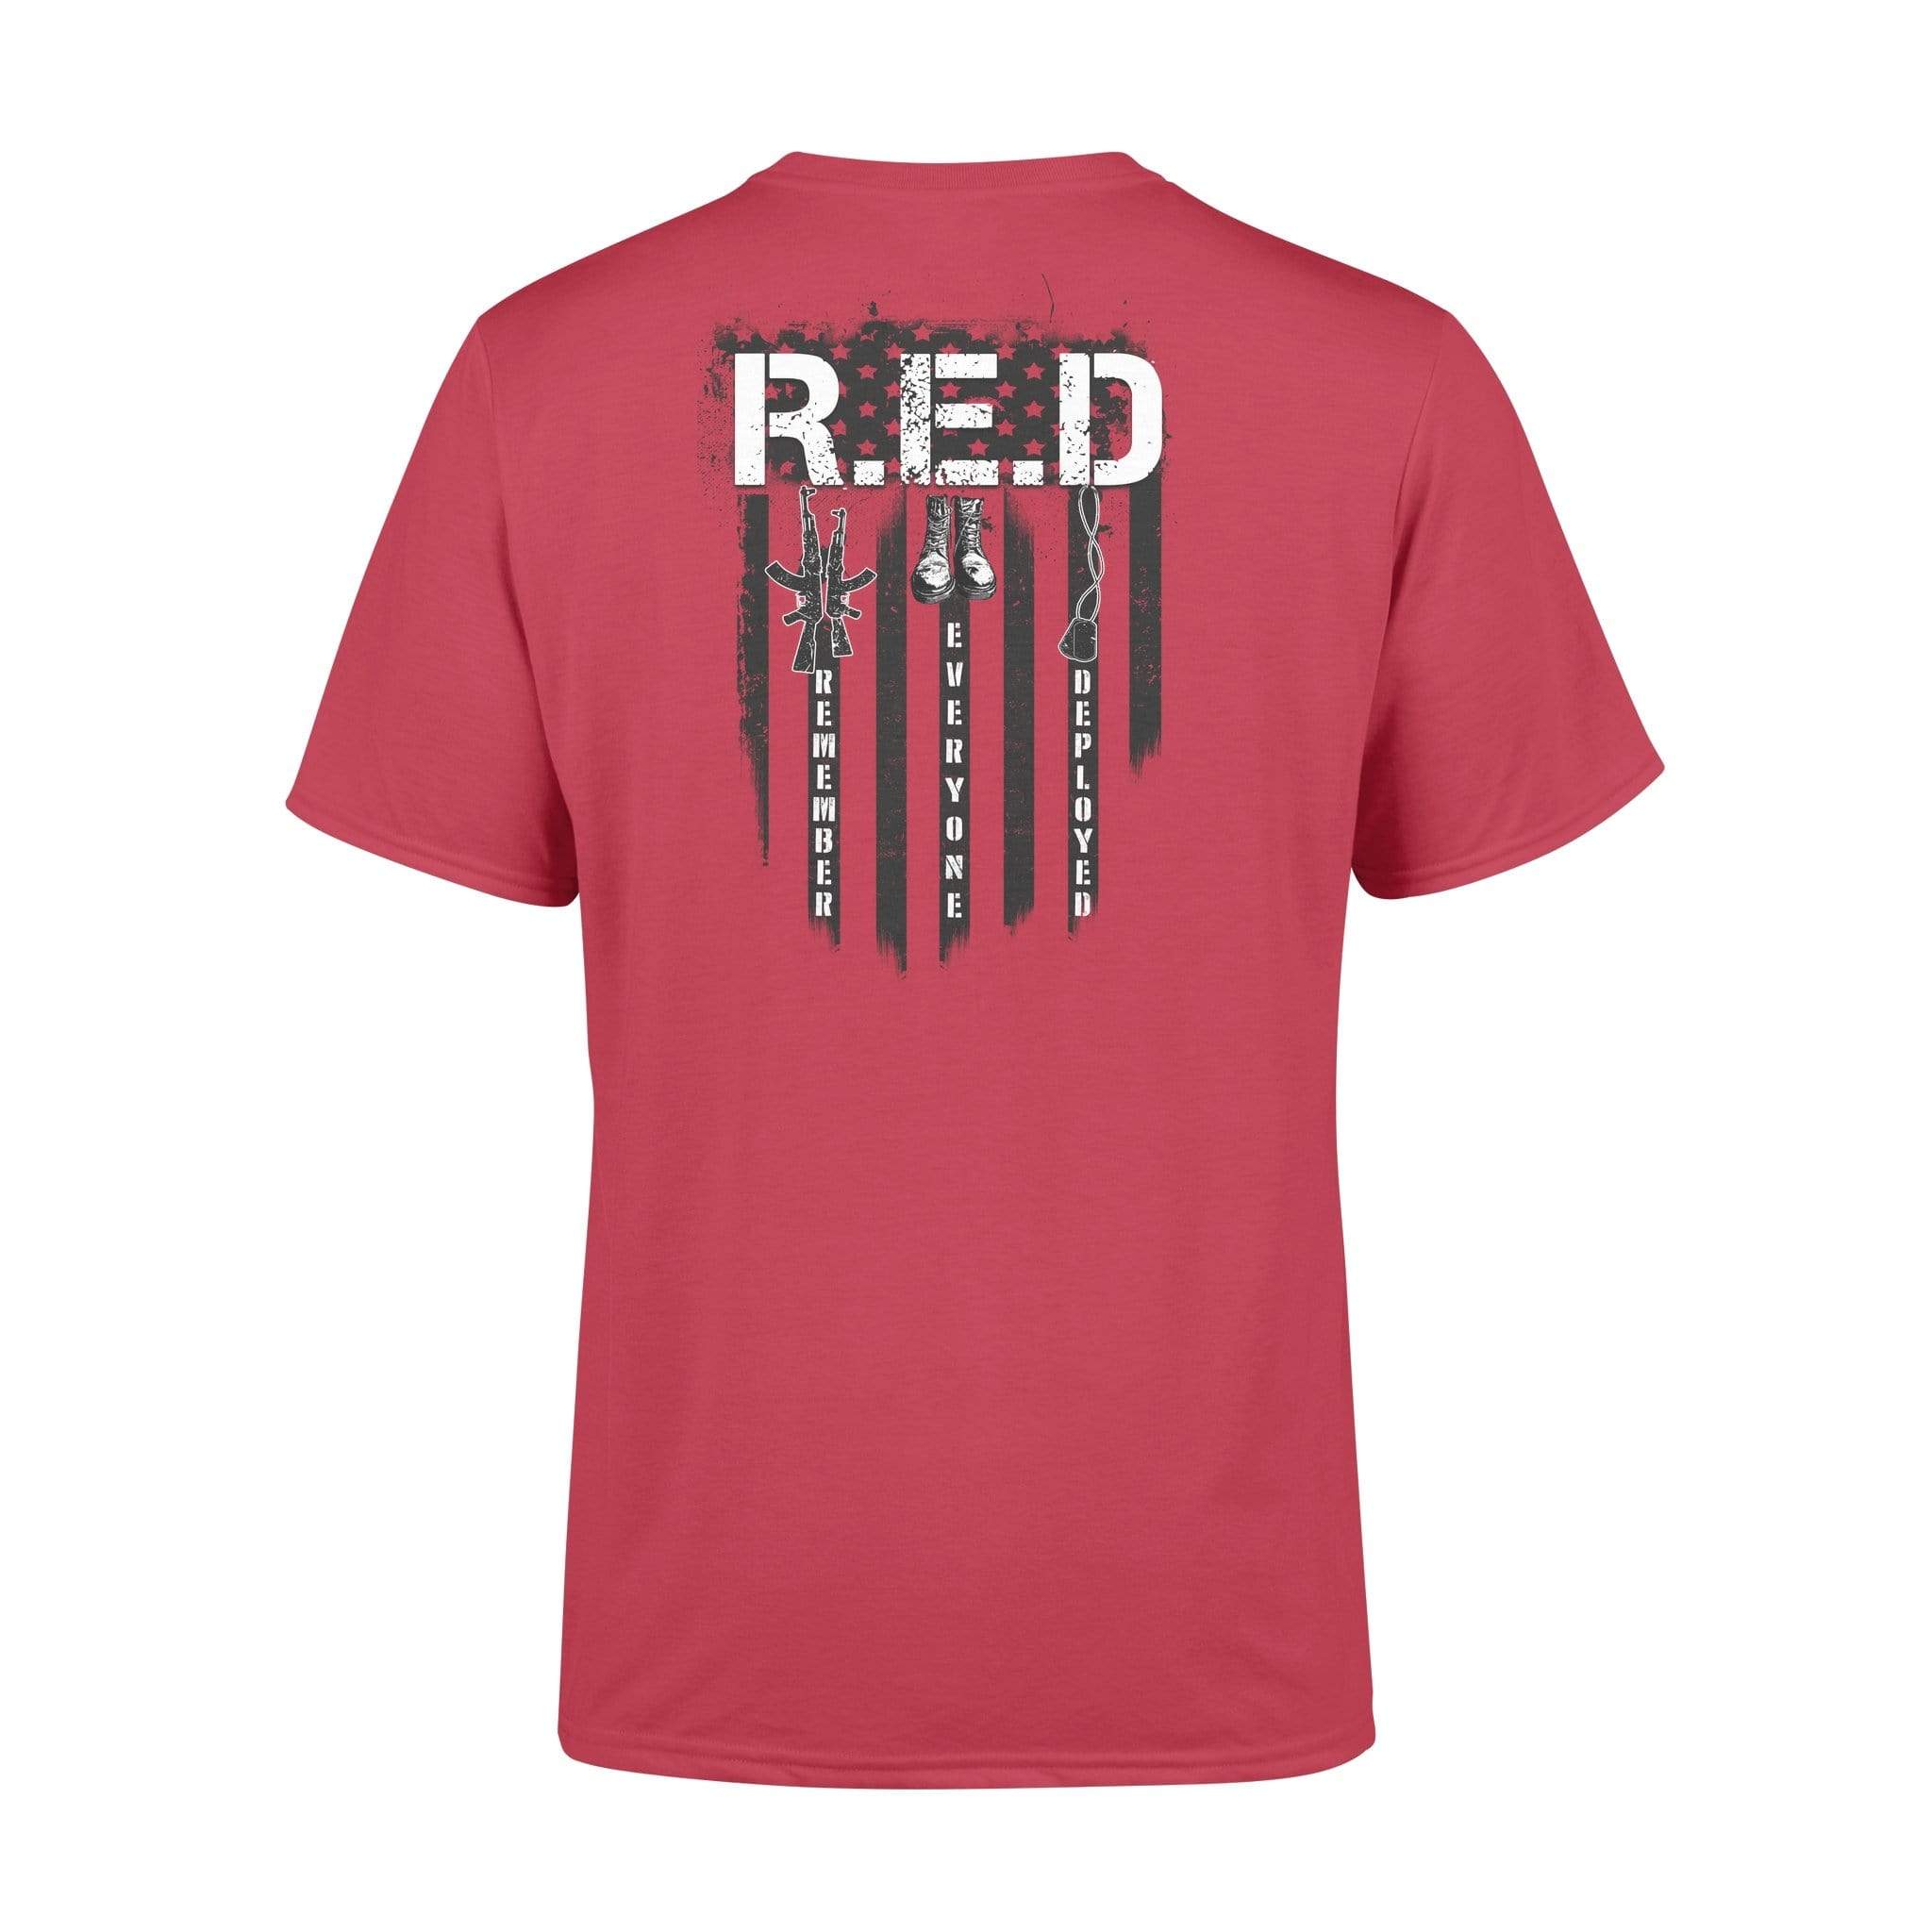 Army - RED Friday Flag Shirt